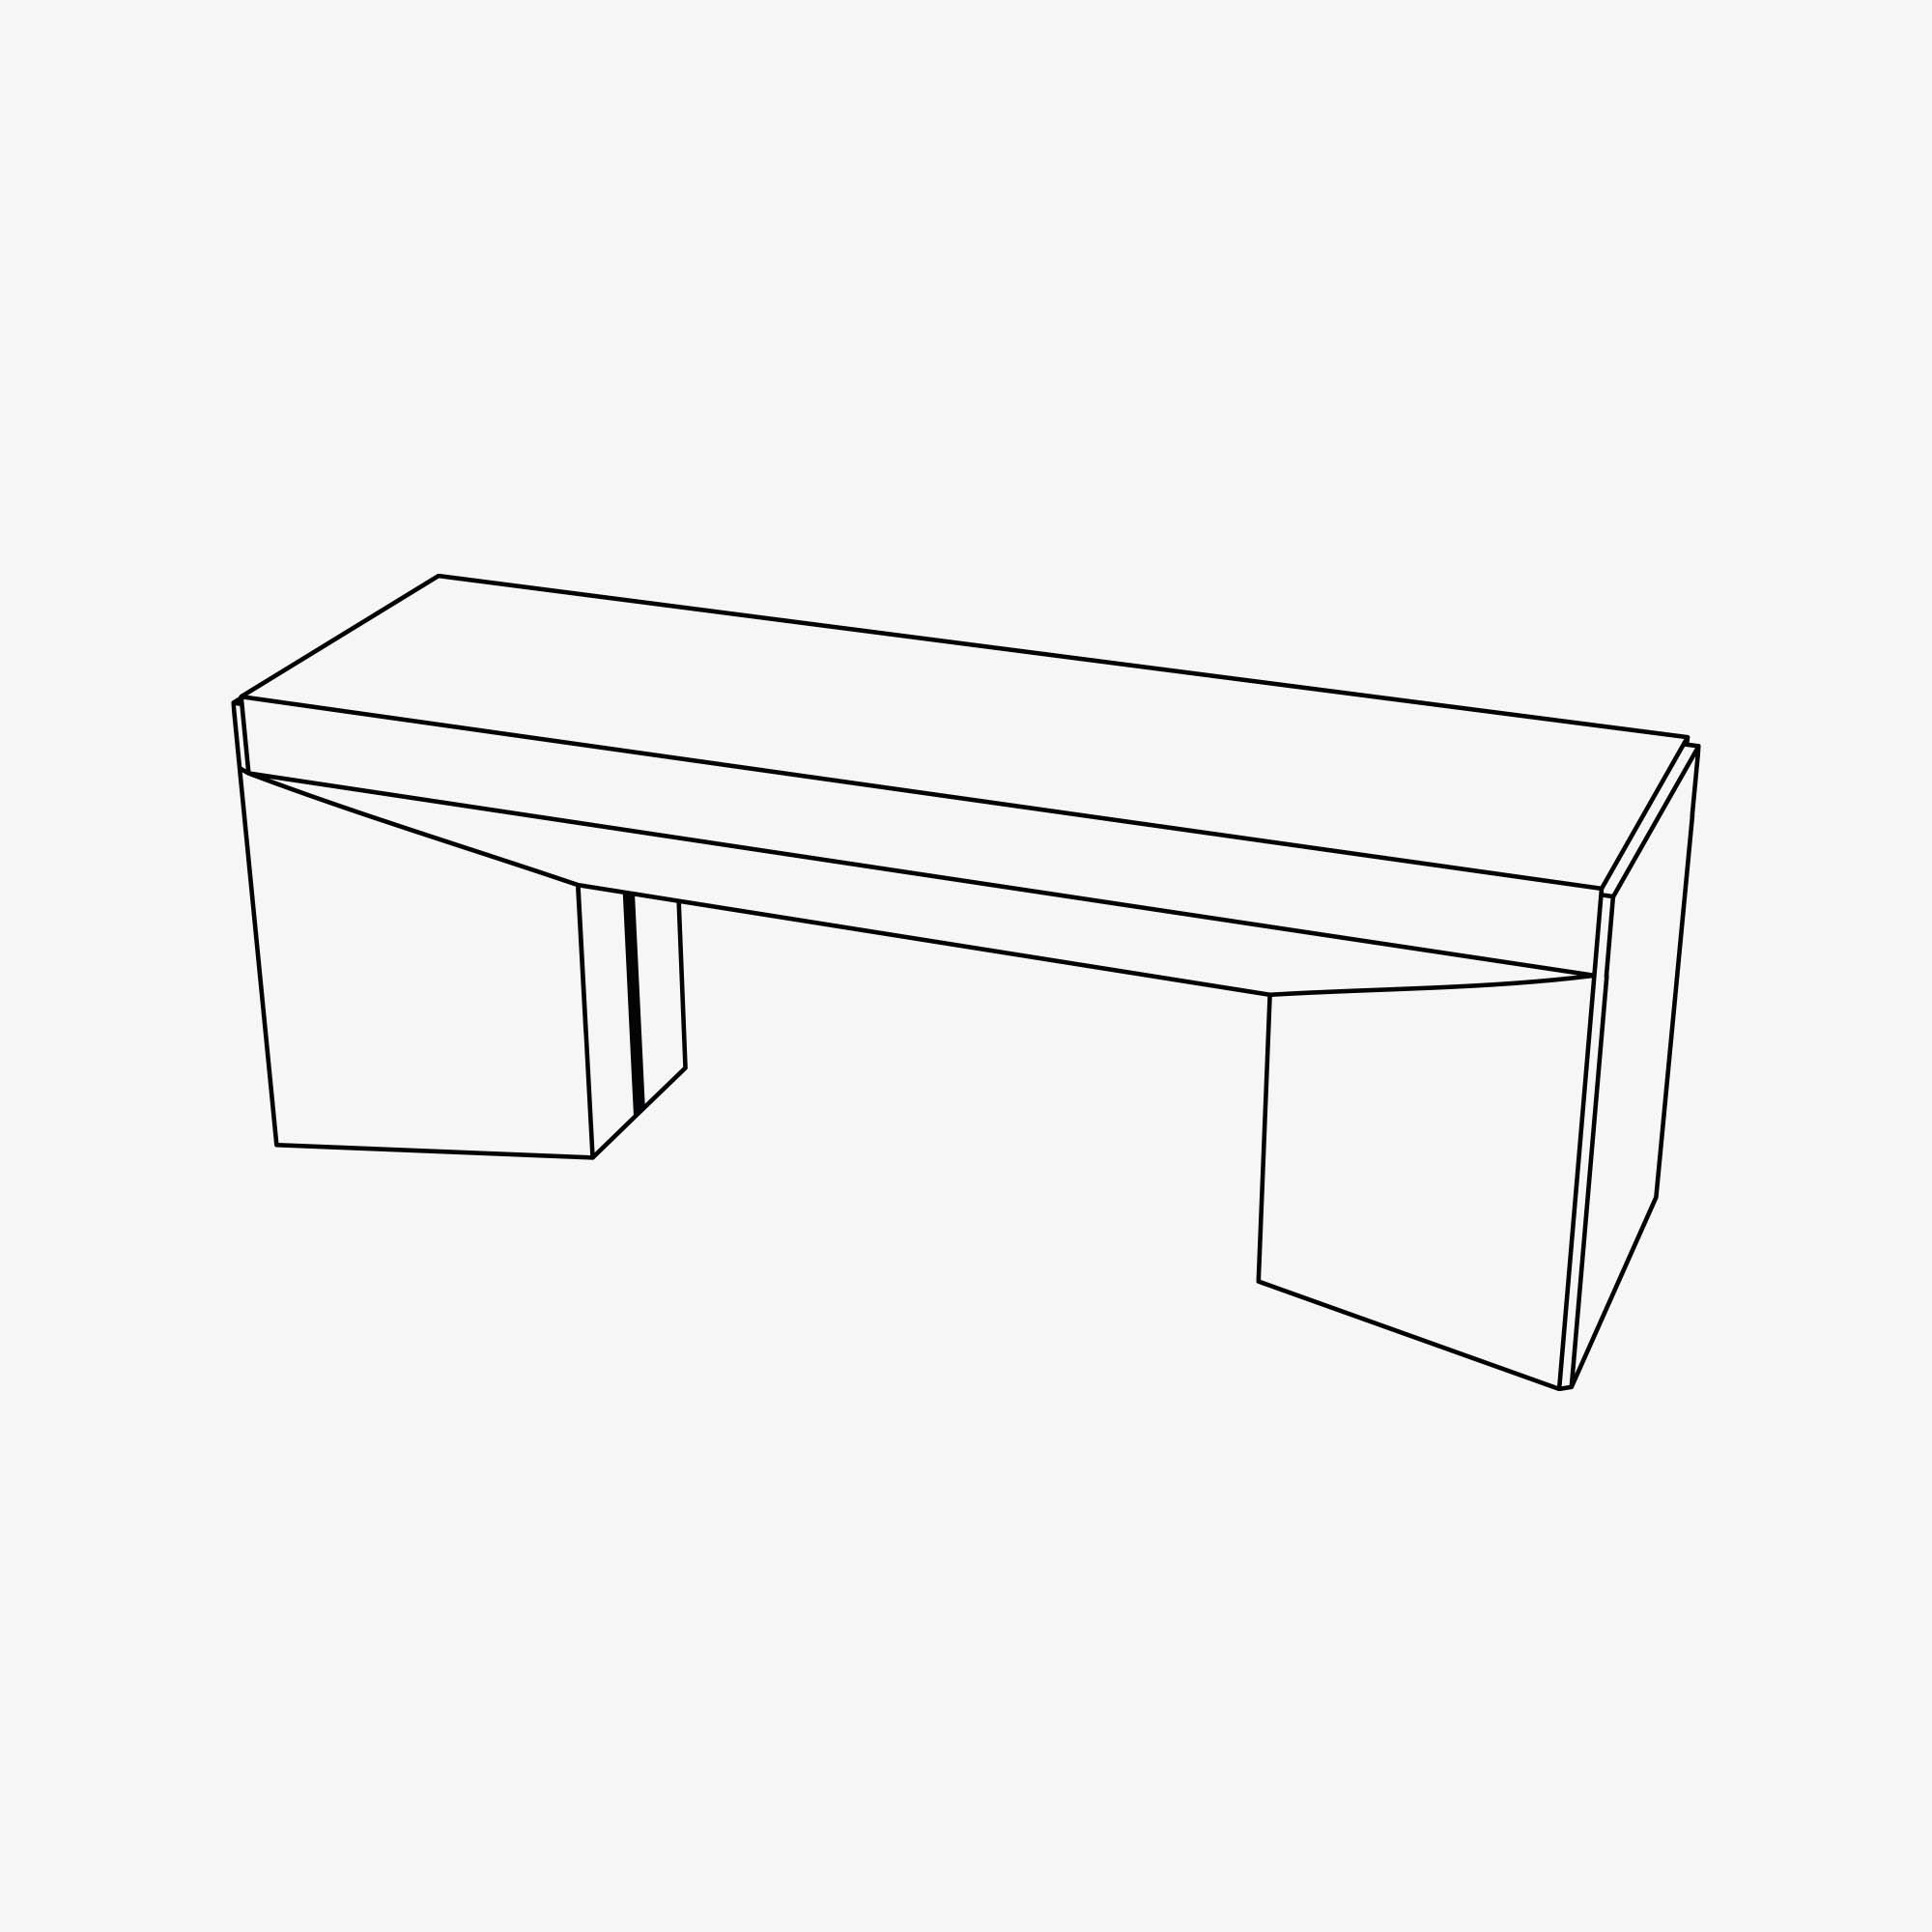 ROOM IN A BOX bench drawing